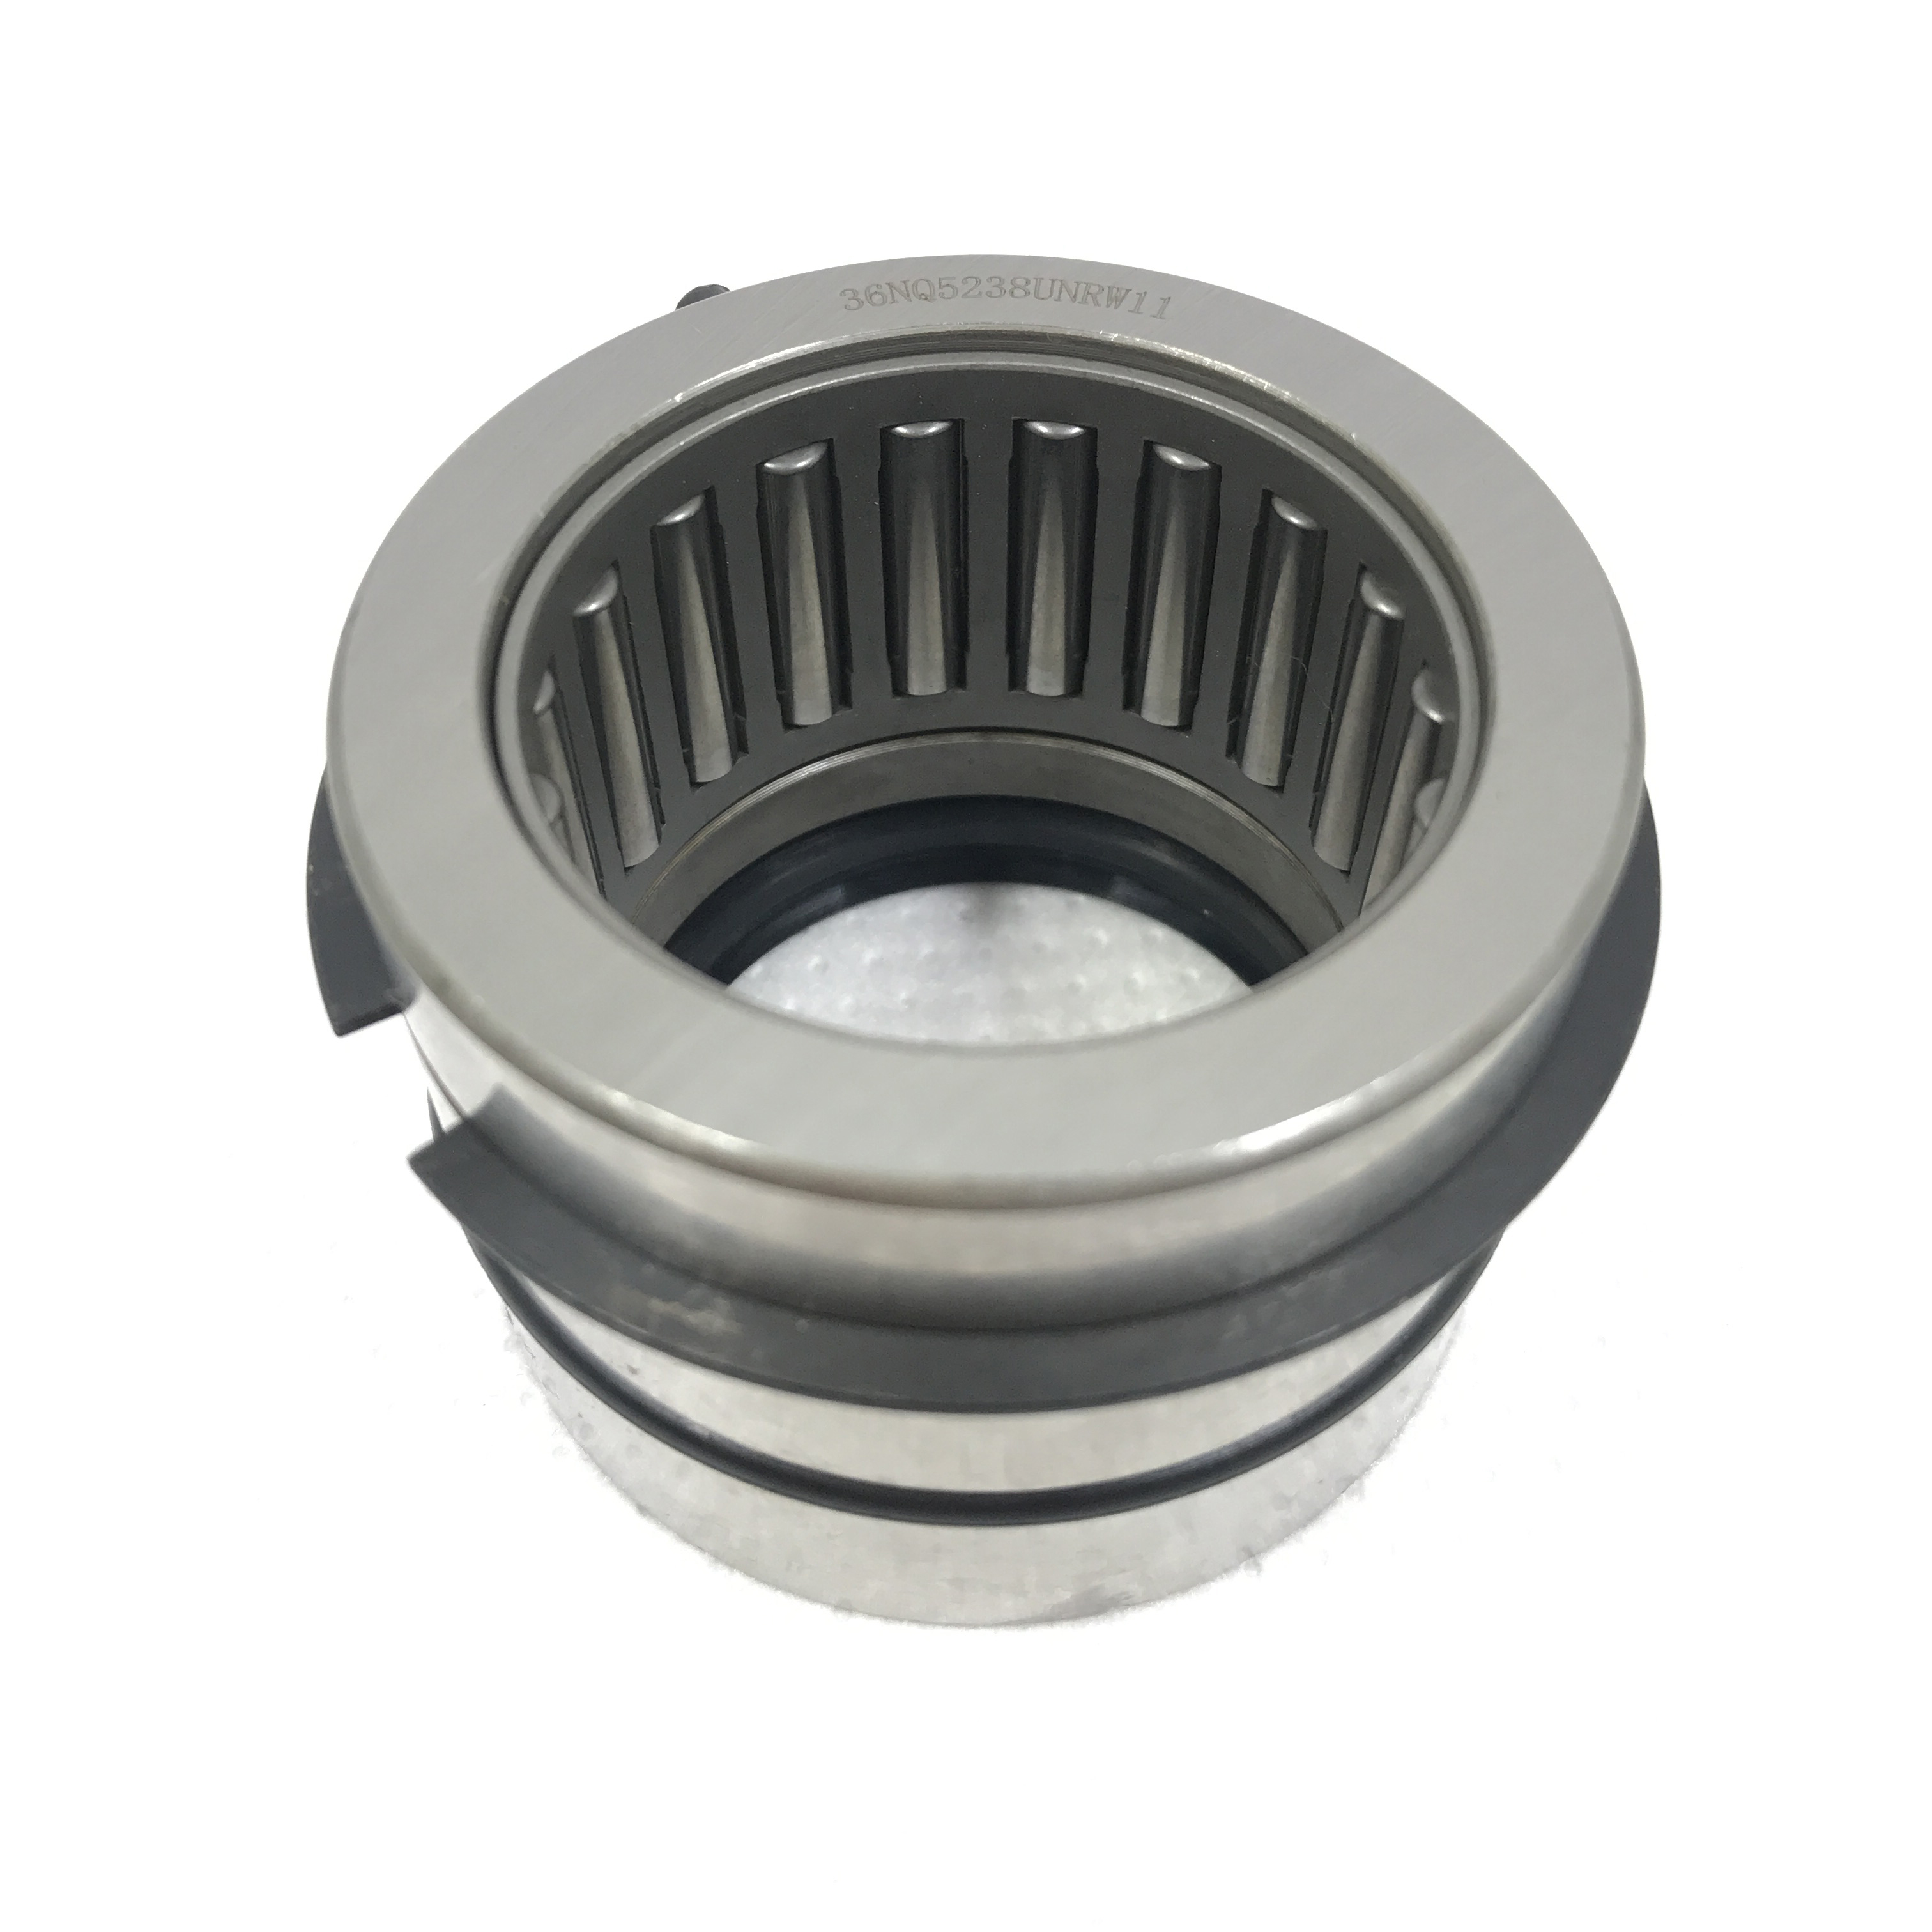 BEARING FOR OUTBOARD 60-70HP 93311-636U6